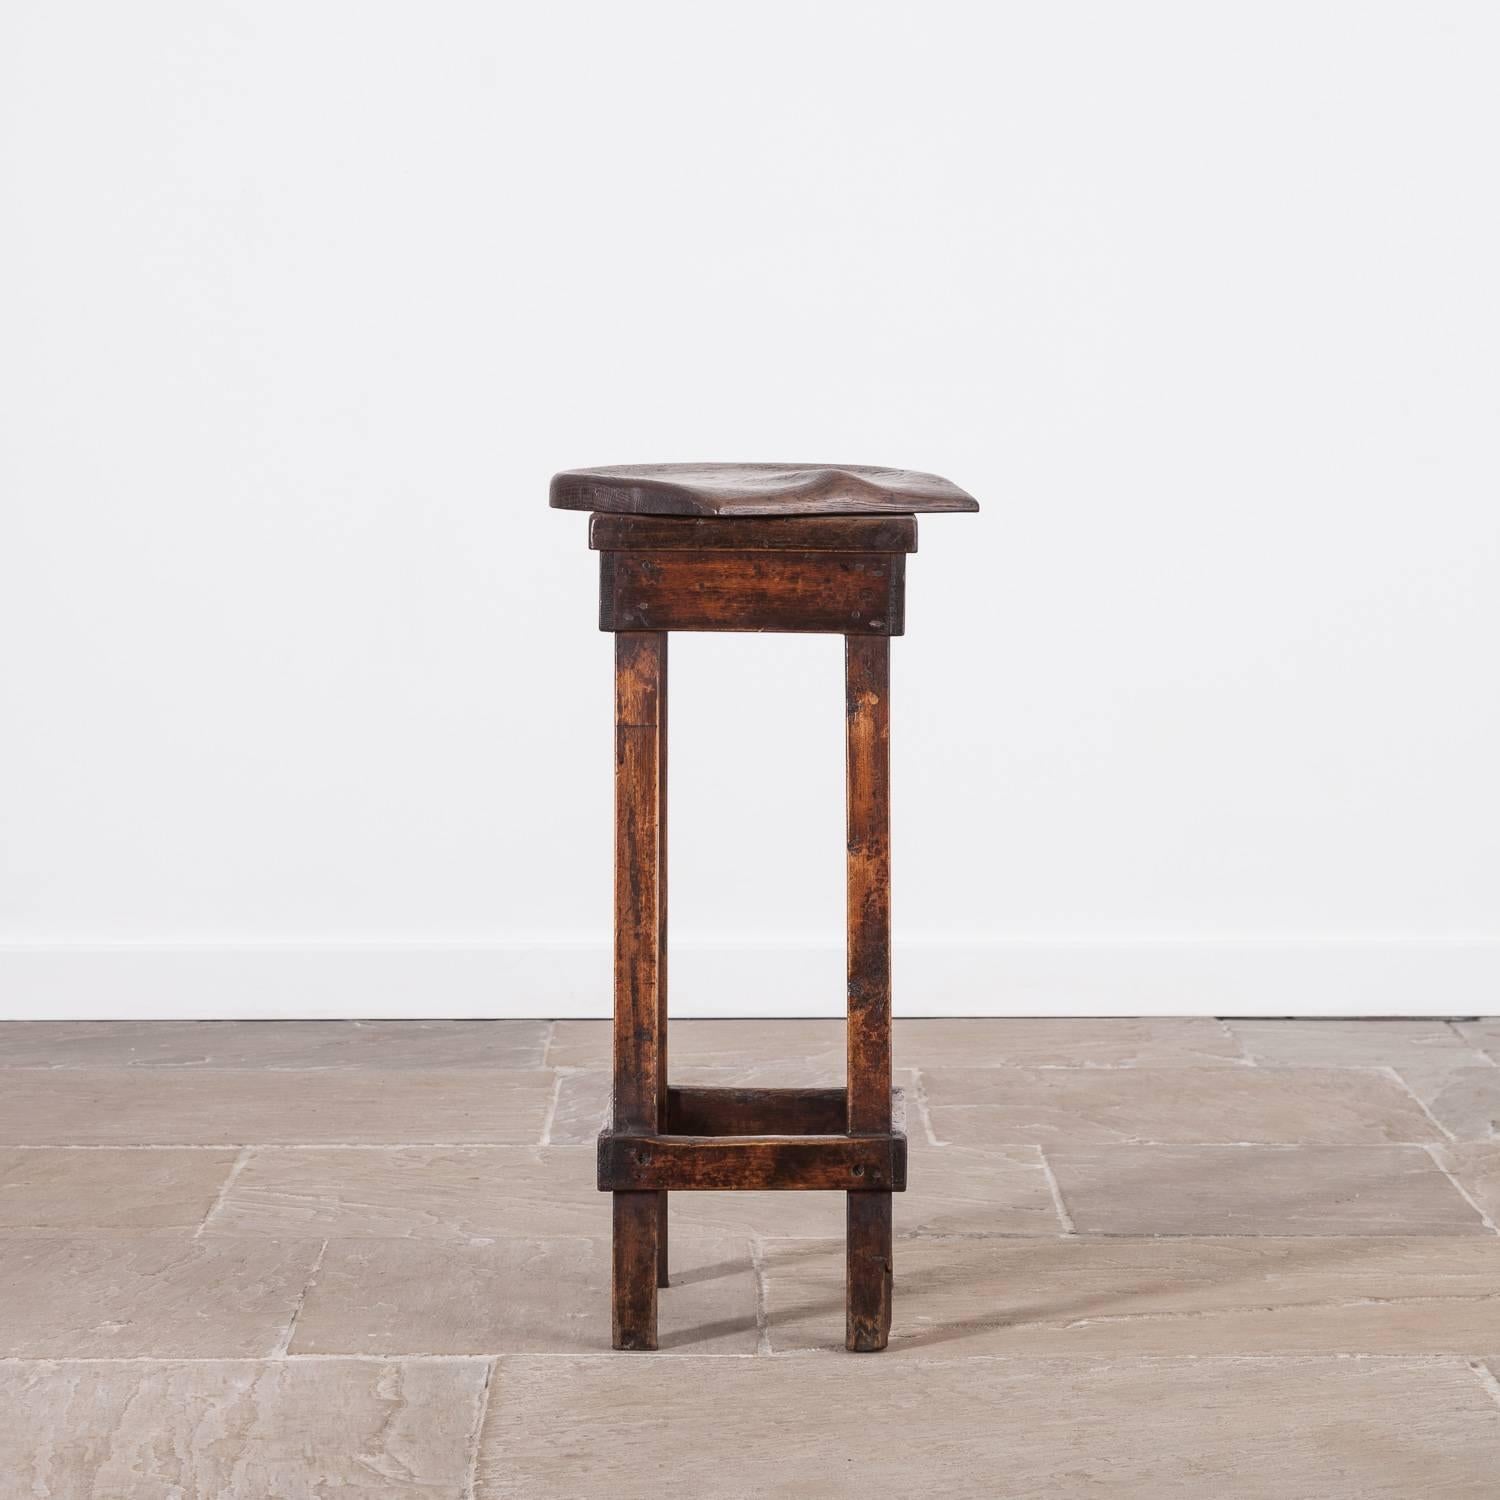 Lovely 19th century oak and pine shop stool.

Measures: 76 cm high, 38 cm wide and 29 cm deep.